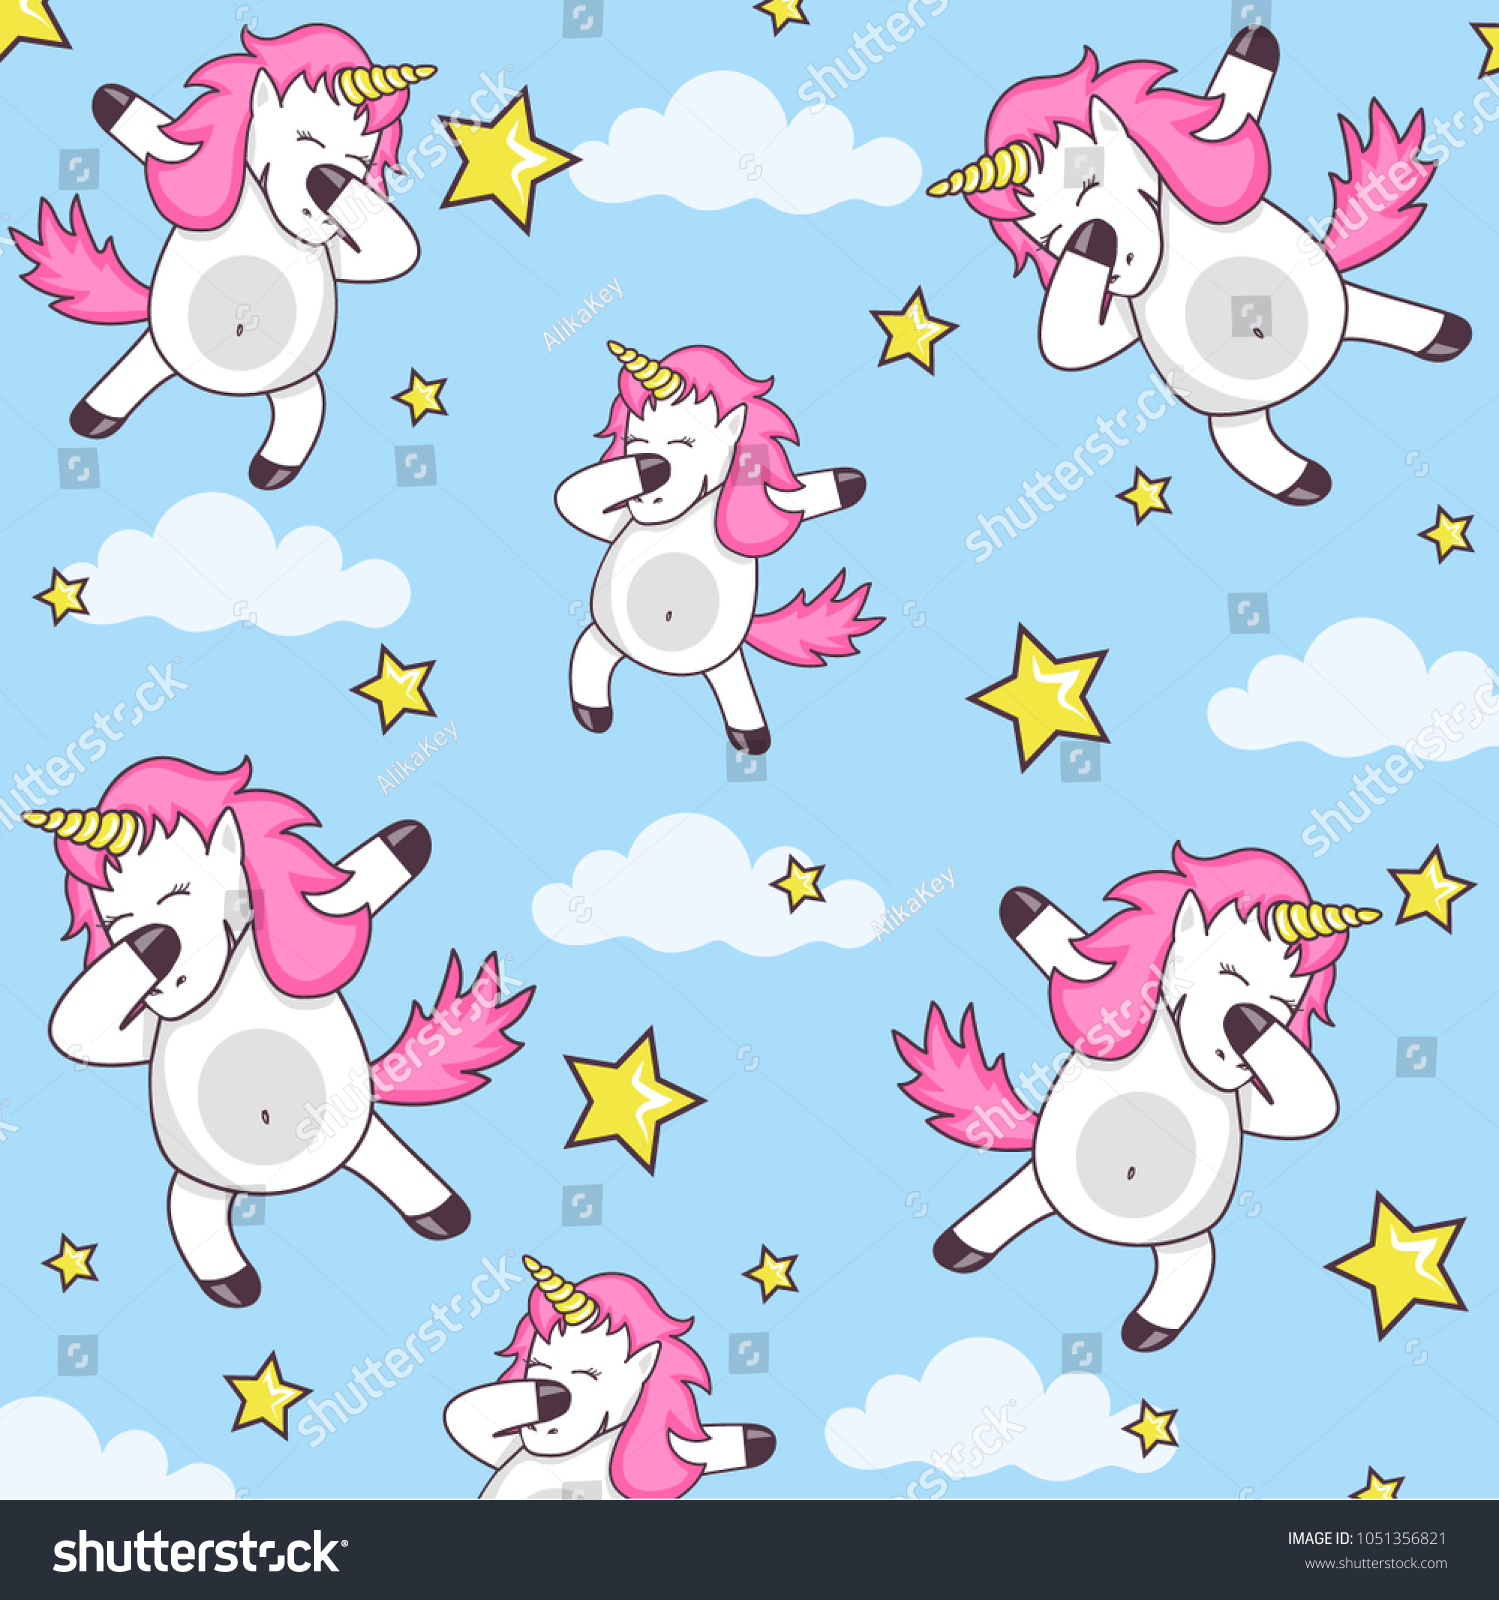 SVG of Vector pattern with cute unicorns, clouds and stars. Magic background with little Dabbing unicorns. Cute funny unicorn dancing dab vector cartoon illustration. svg